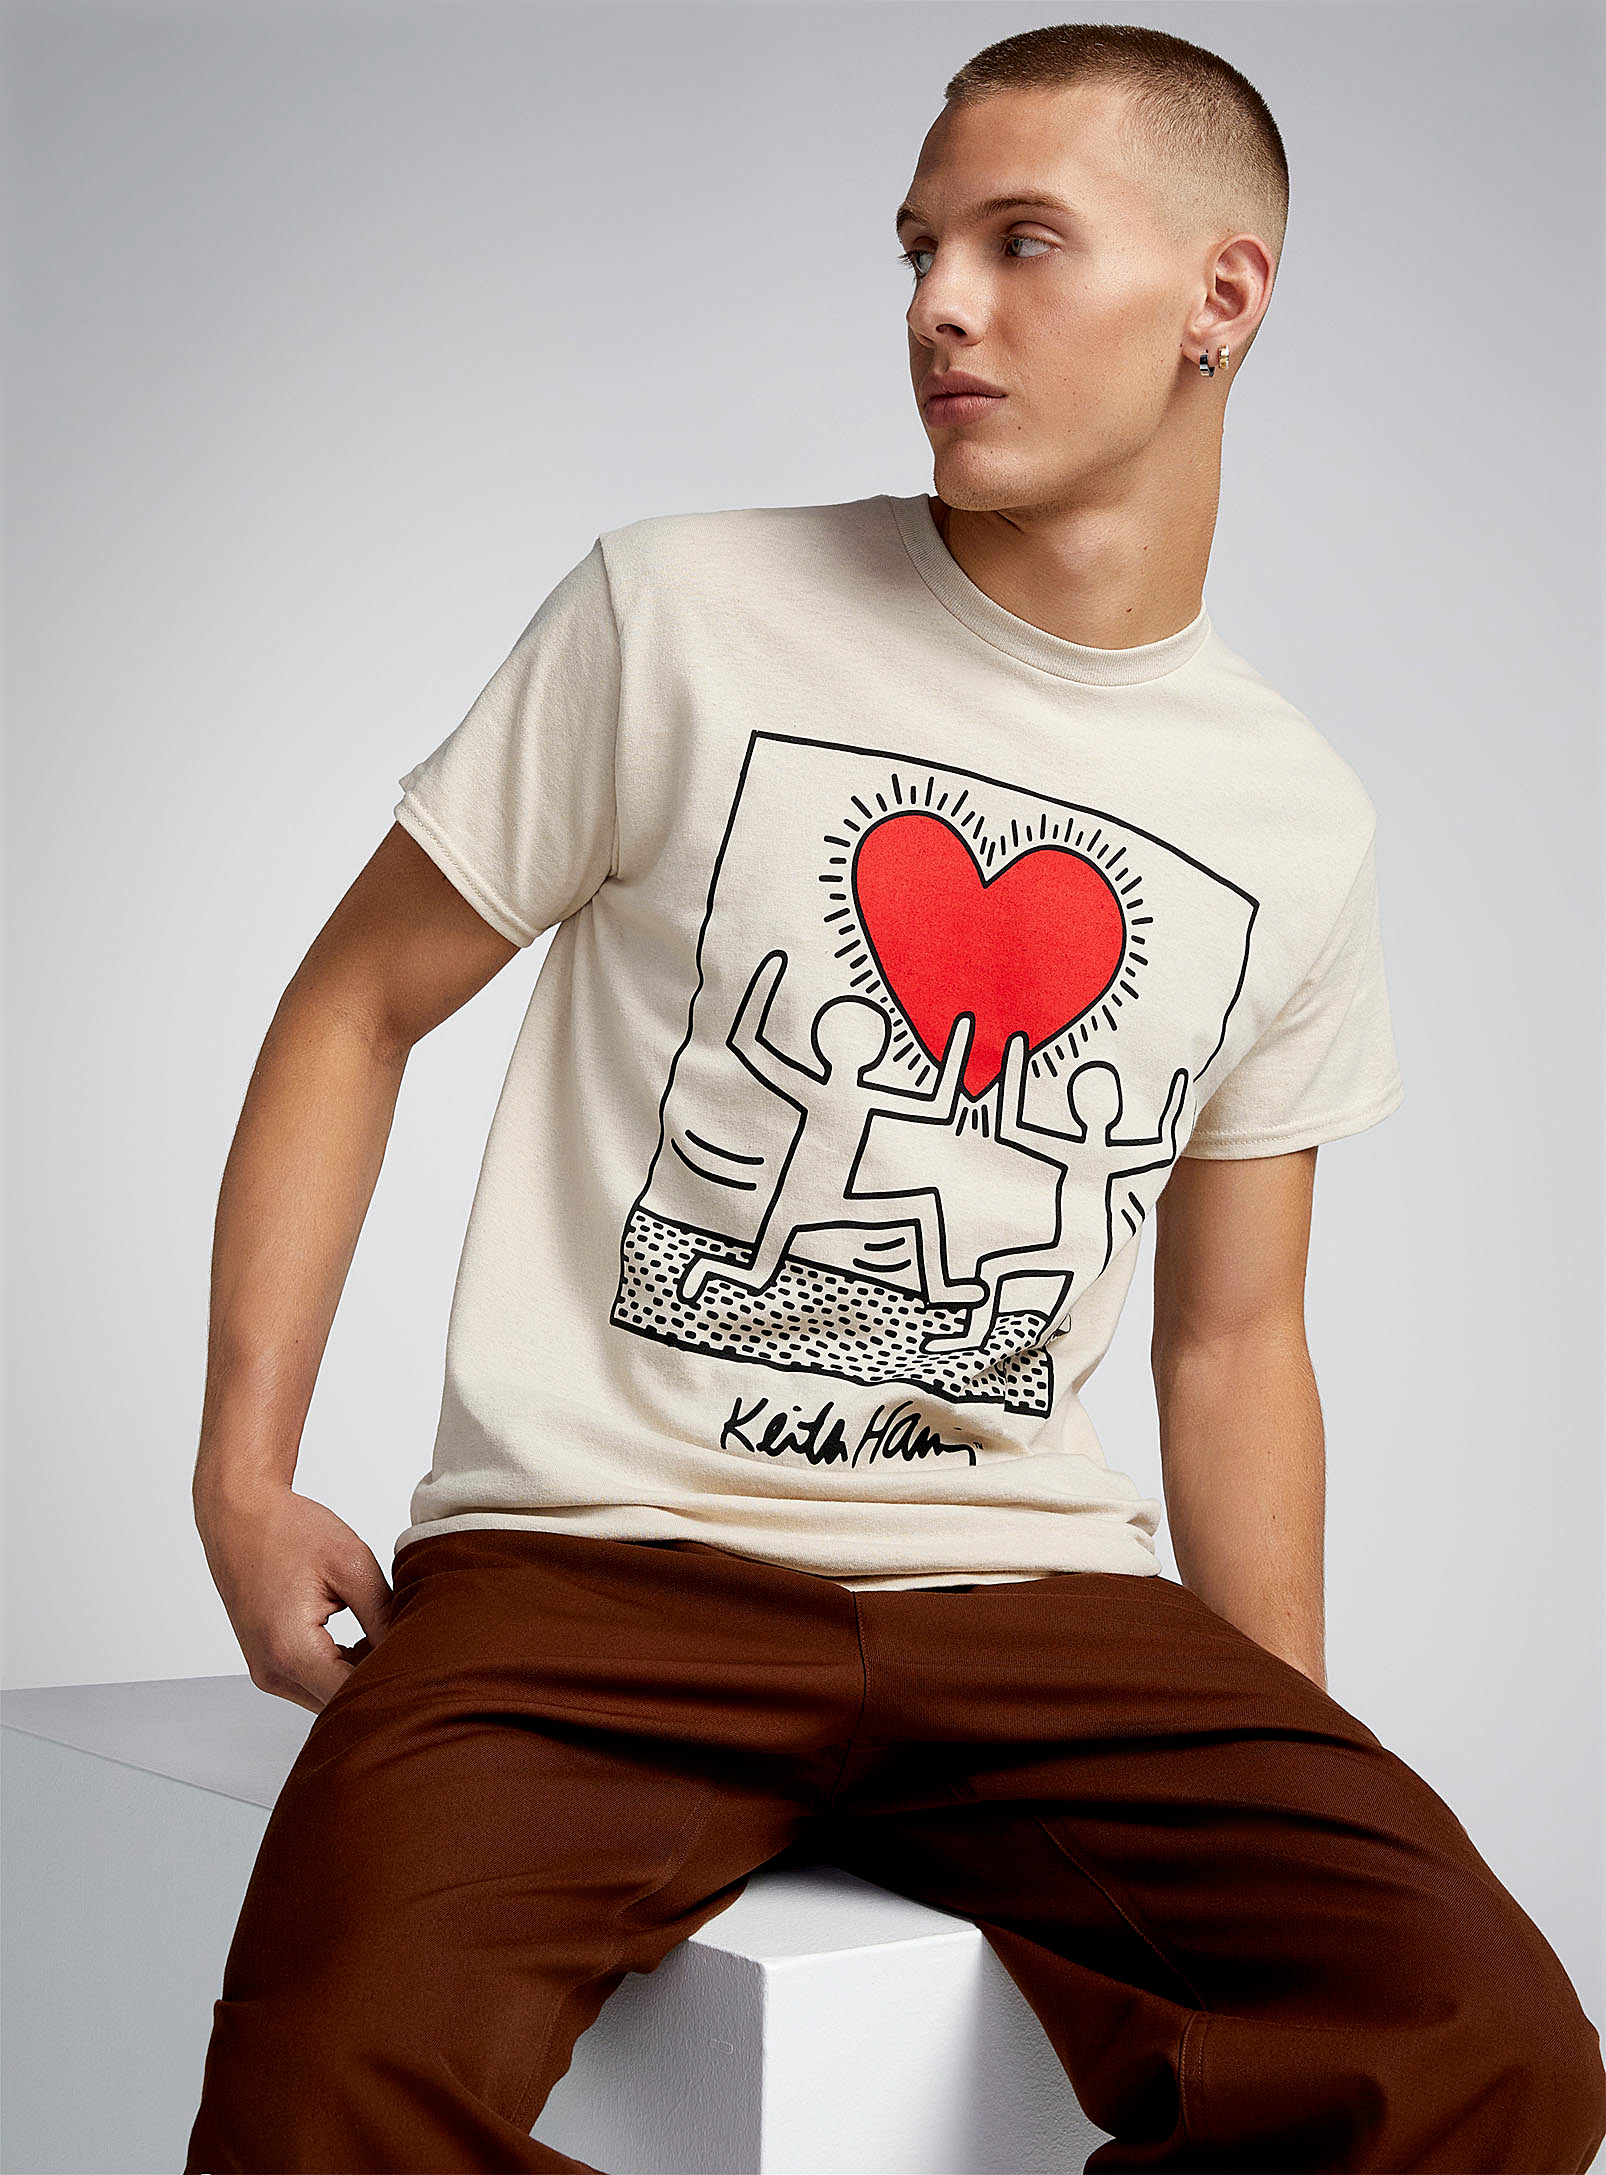 Djab Keith Haring Graphic T-shirt In Fawn